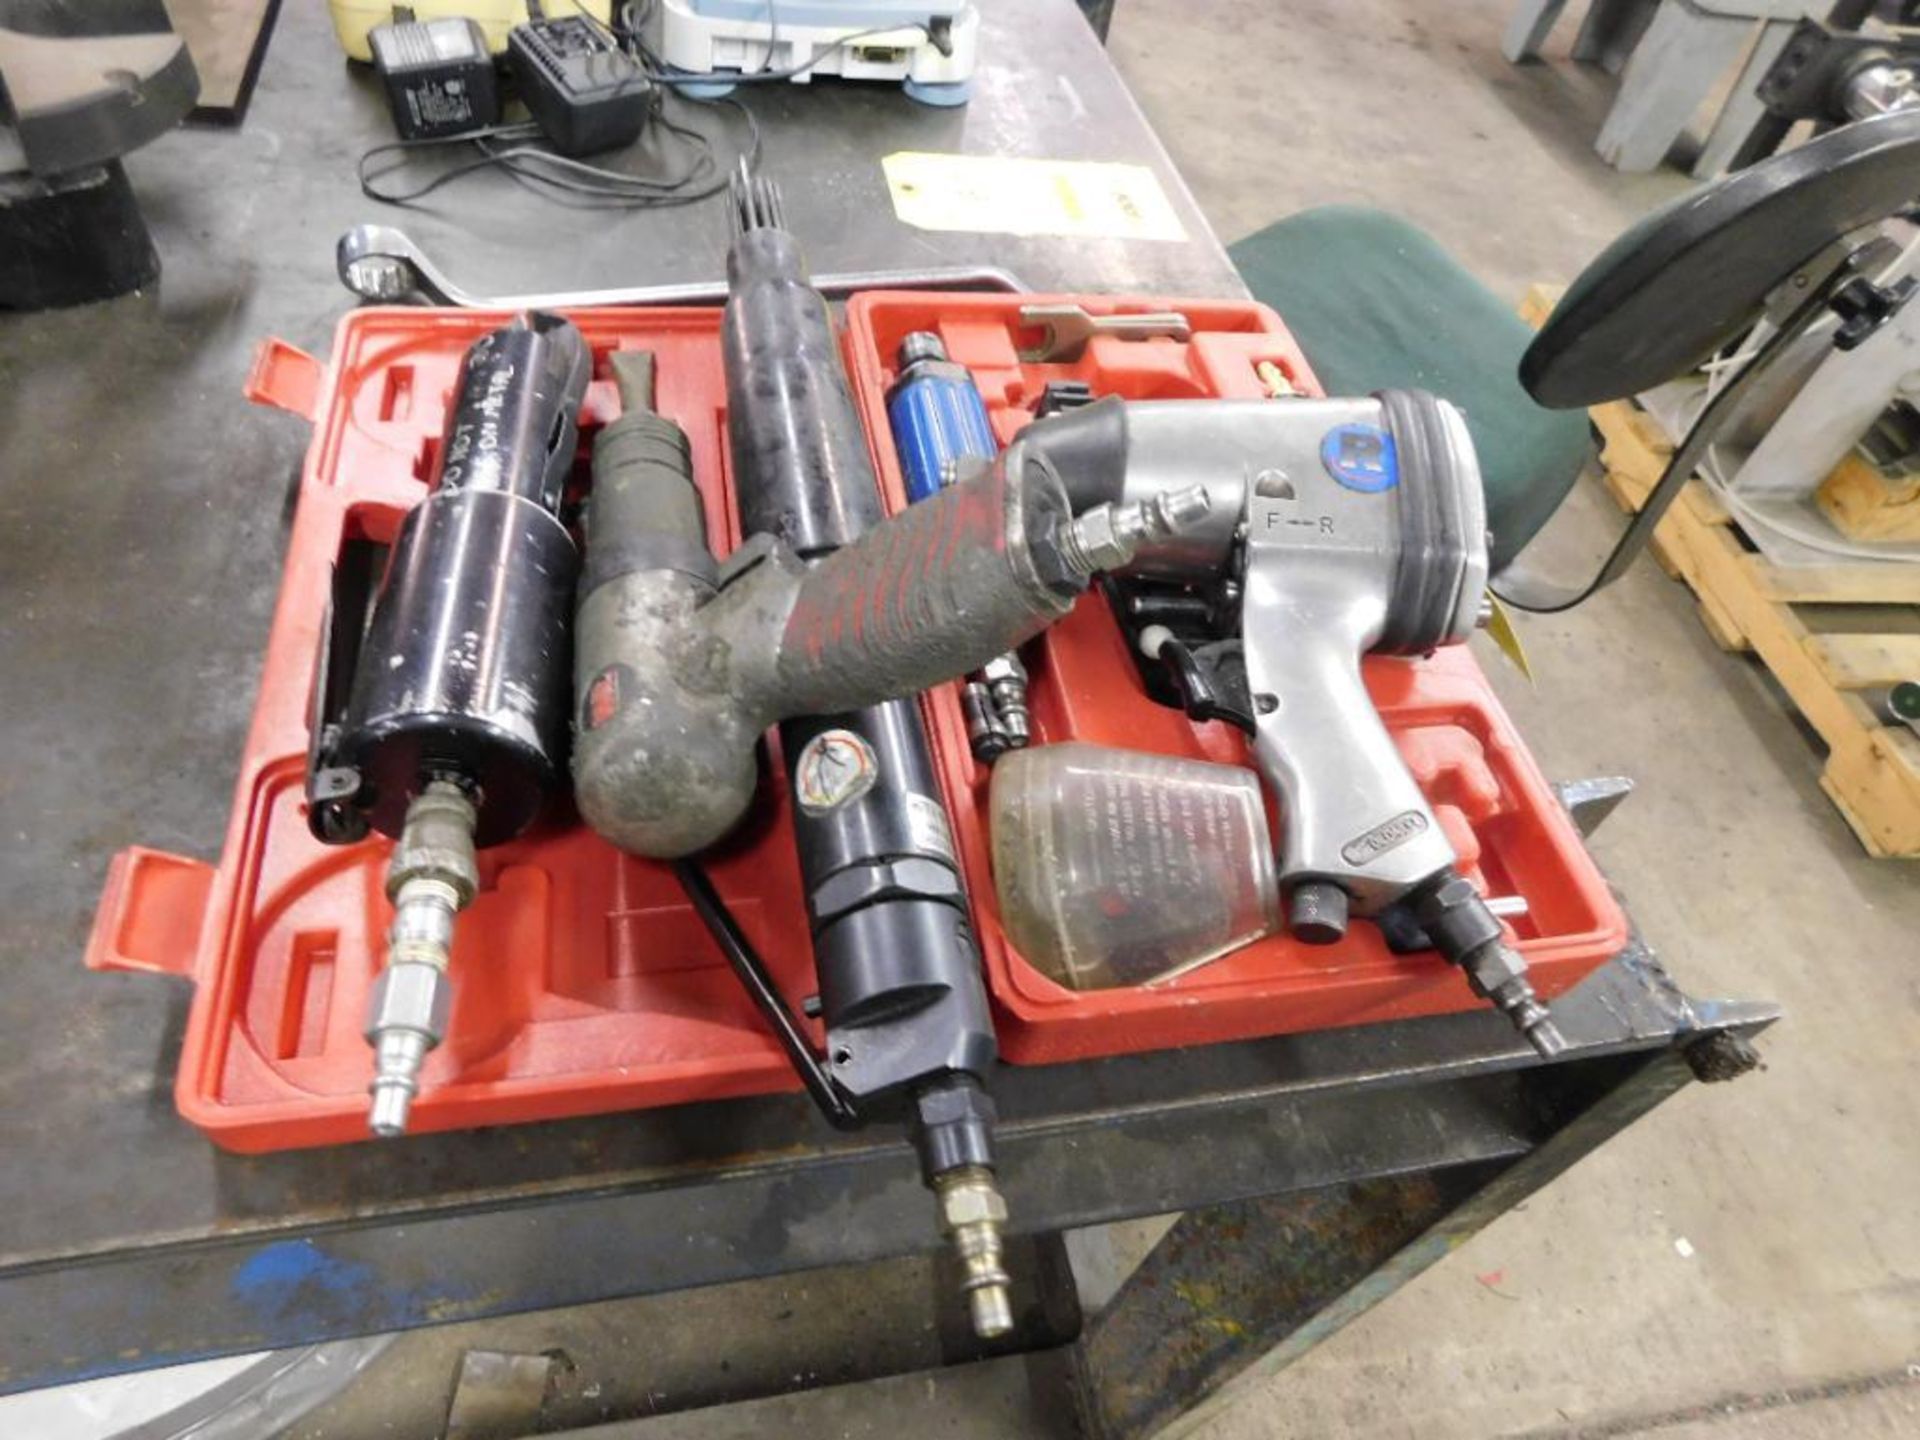 LOT: Pneumatic Tools including 1/2 in. Impact Wrench, Die Grinder, Scaler, Chisel & Shear (LOCATION: